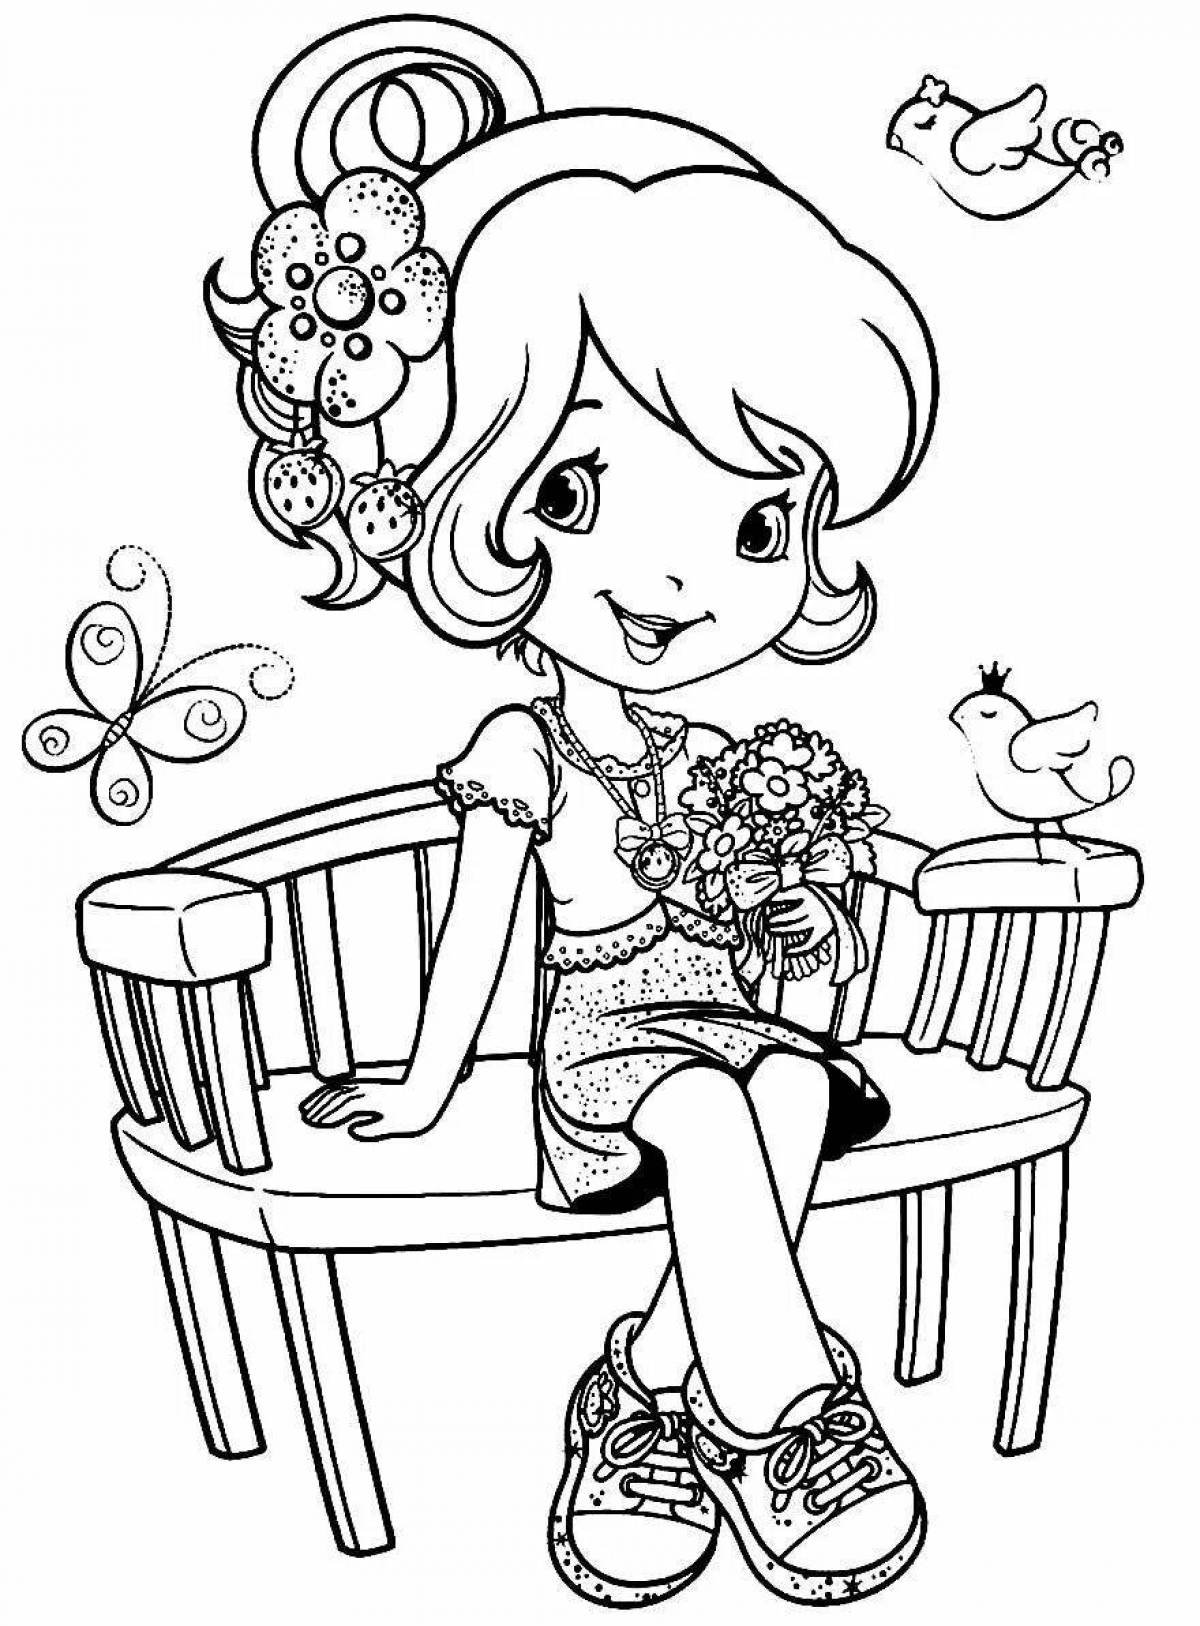 Creative coloring book for girls, interactive